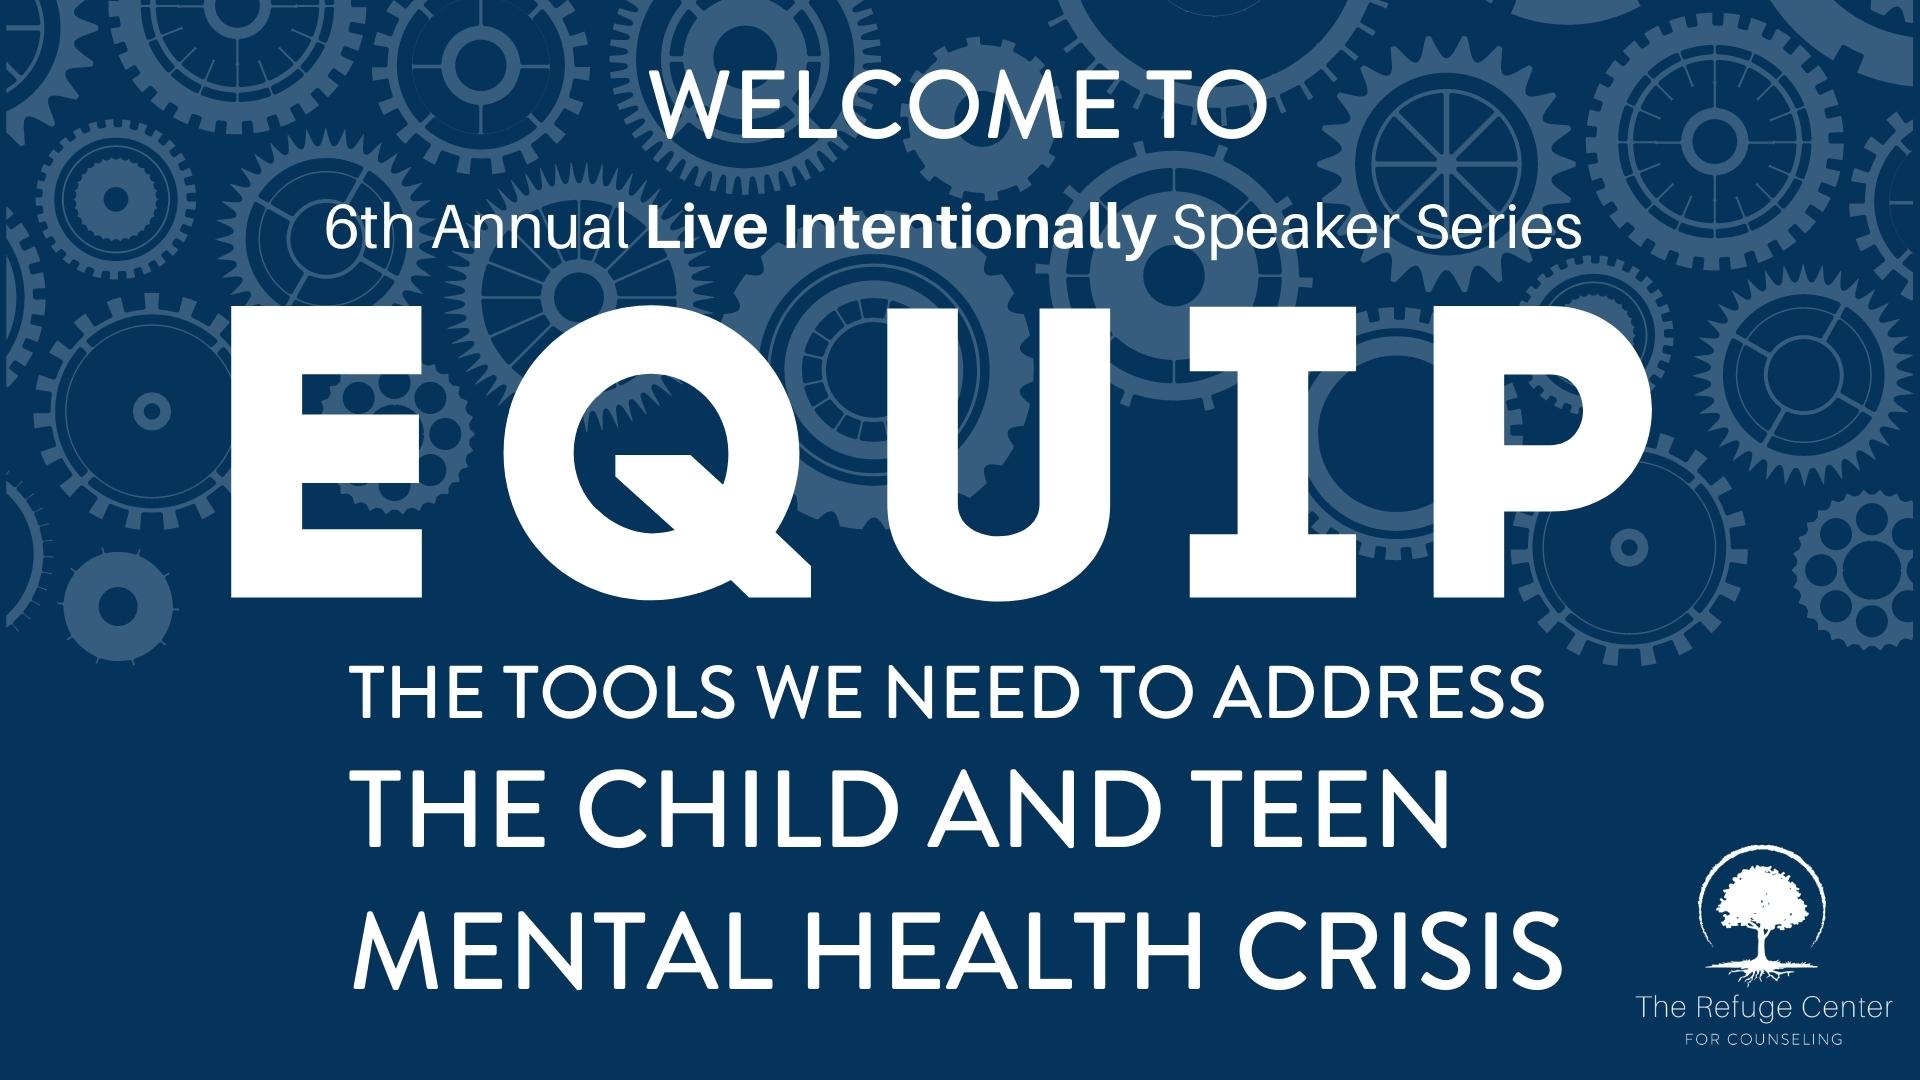 The Tools We Need to Address the Child and Teen Mental Health Crisis